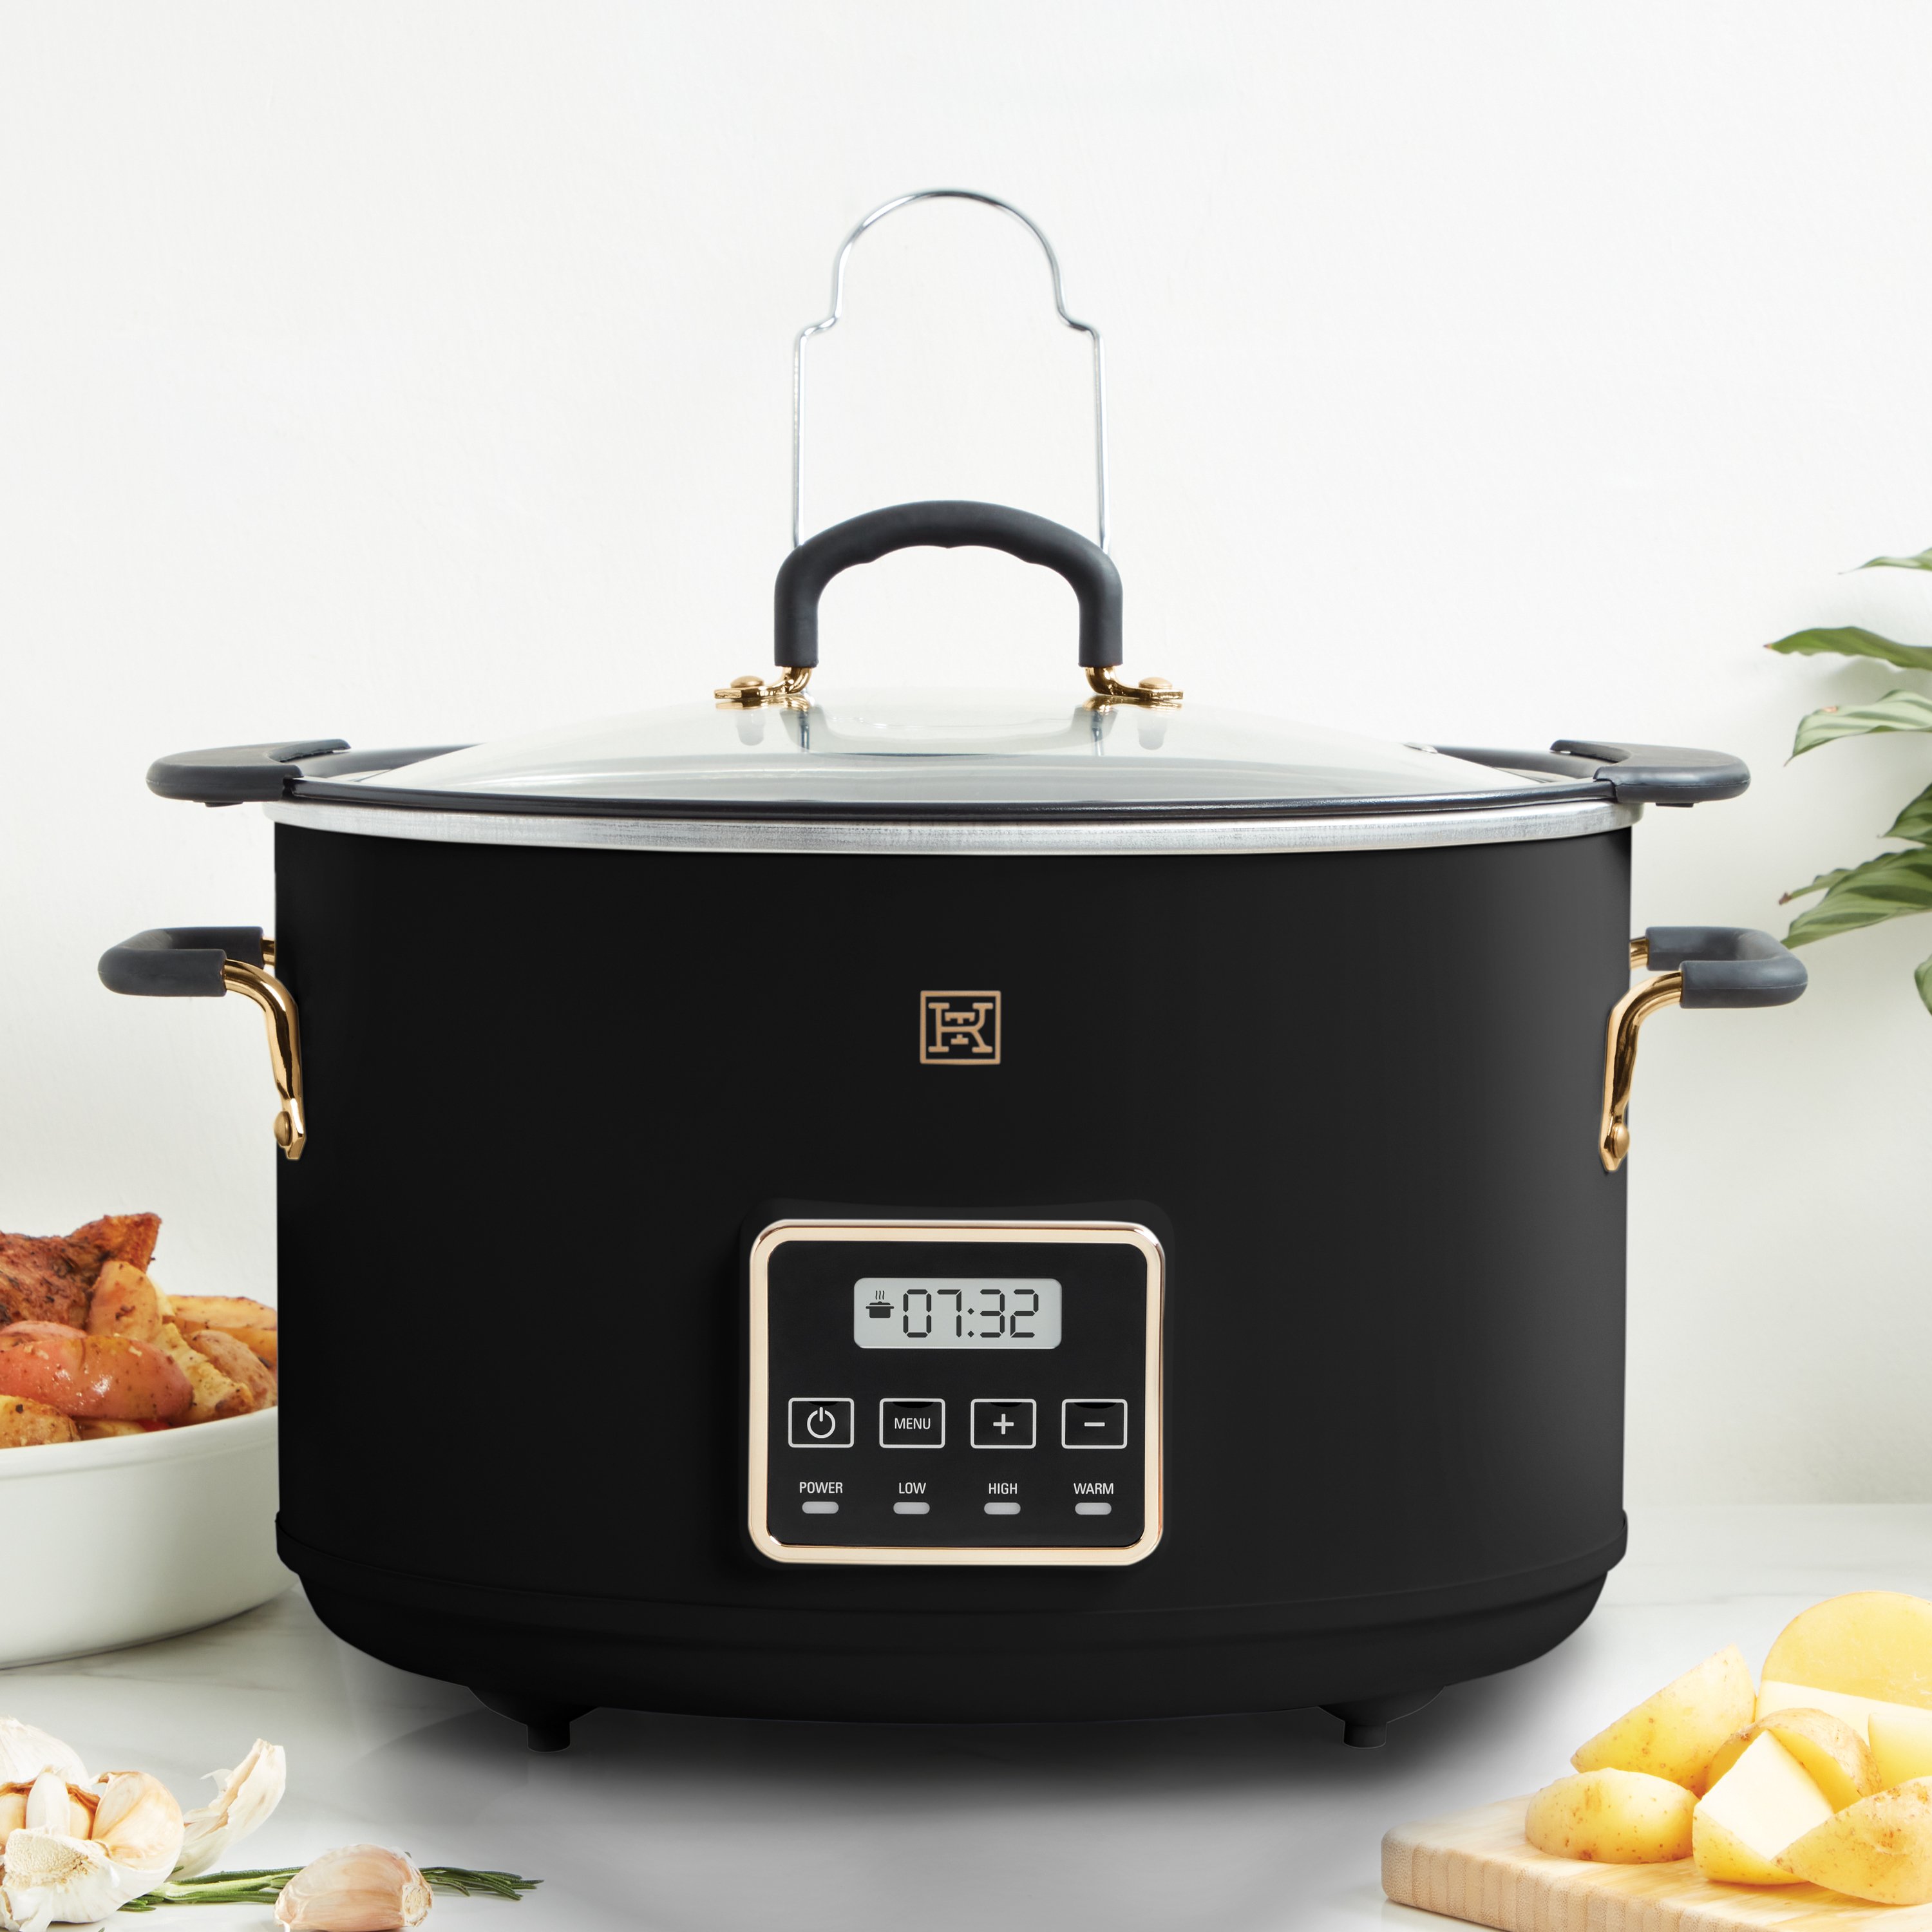 Slow Cookers: Shop for All Your Small Kitchen Appliances & More